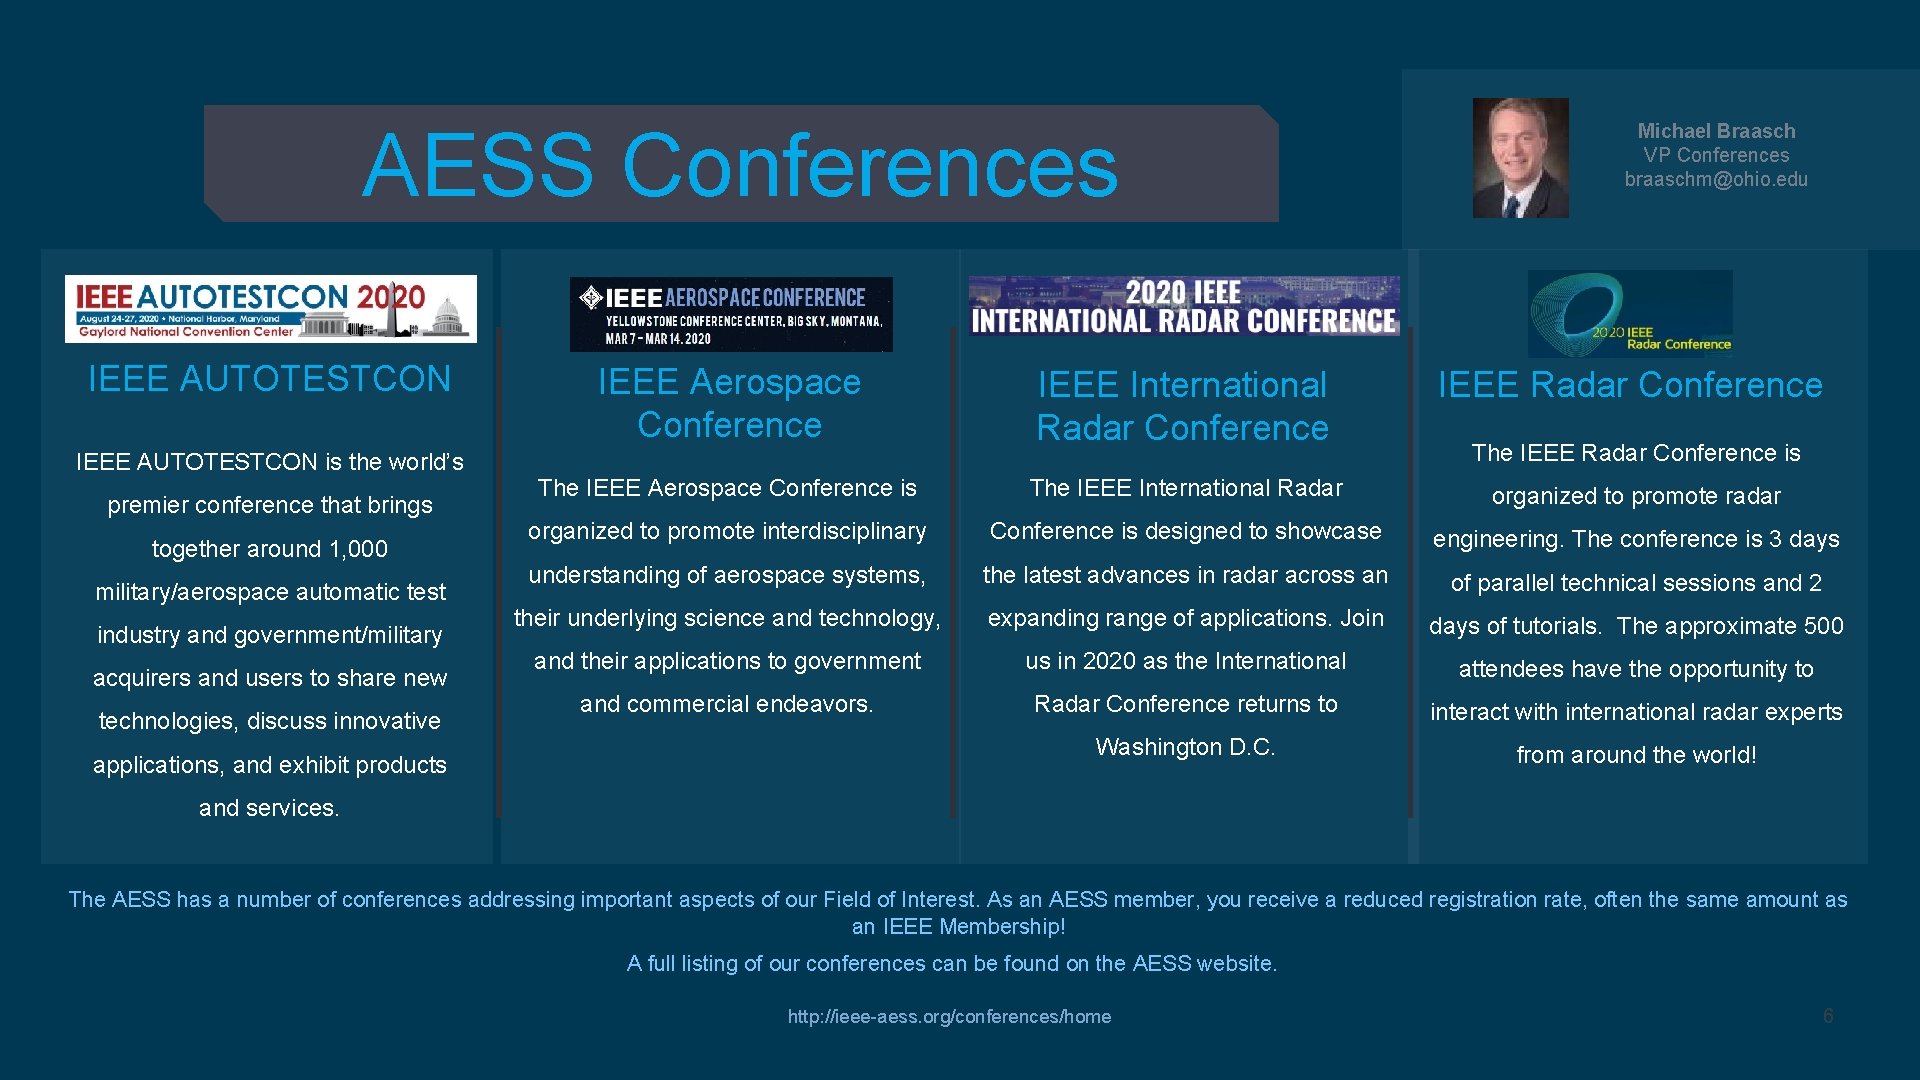 AESS Conferences IEEE AUTOTESTCON is the world’s premier conference that brings together around 1,